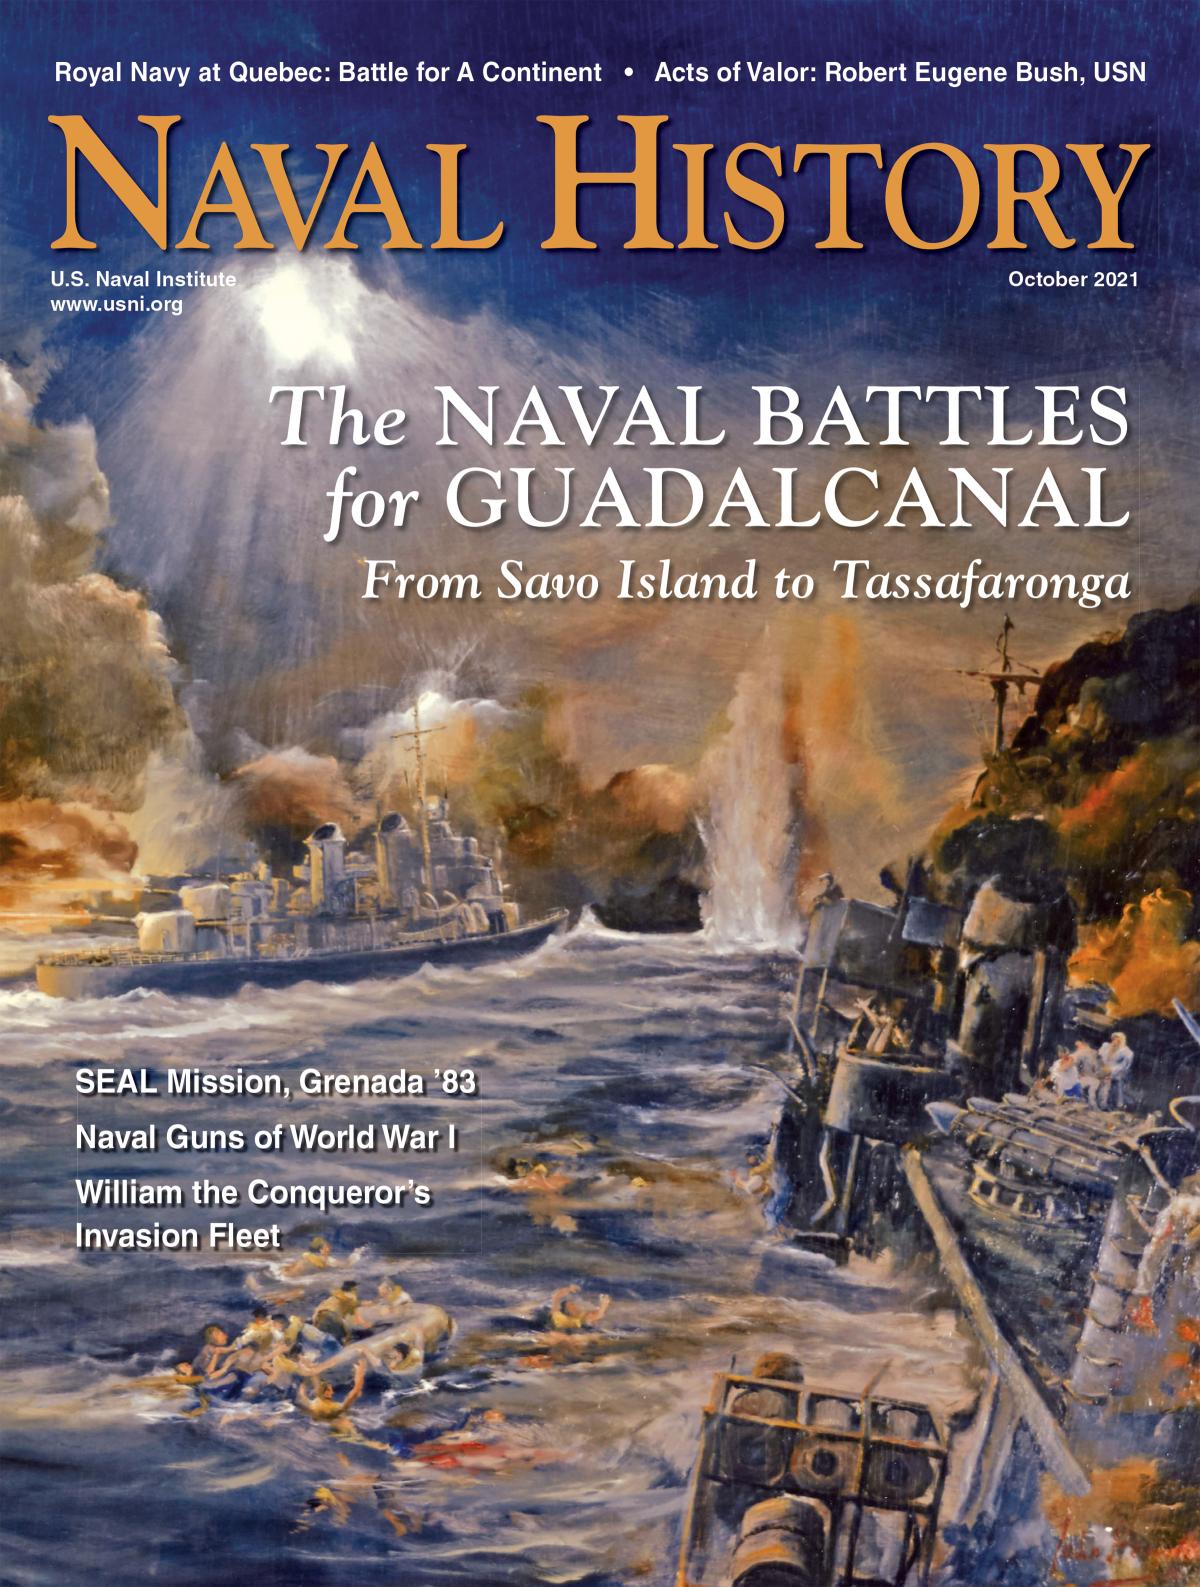 Naval History Sept/Oct 2021 Cover 